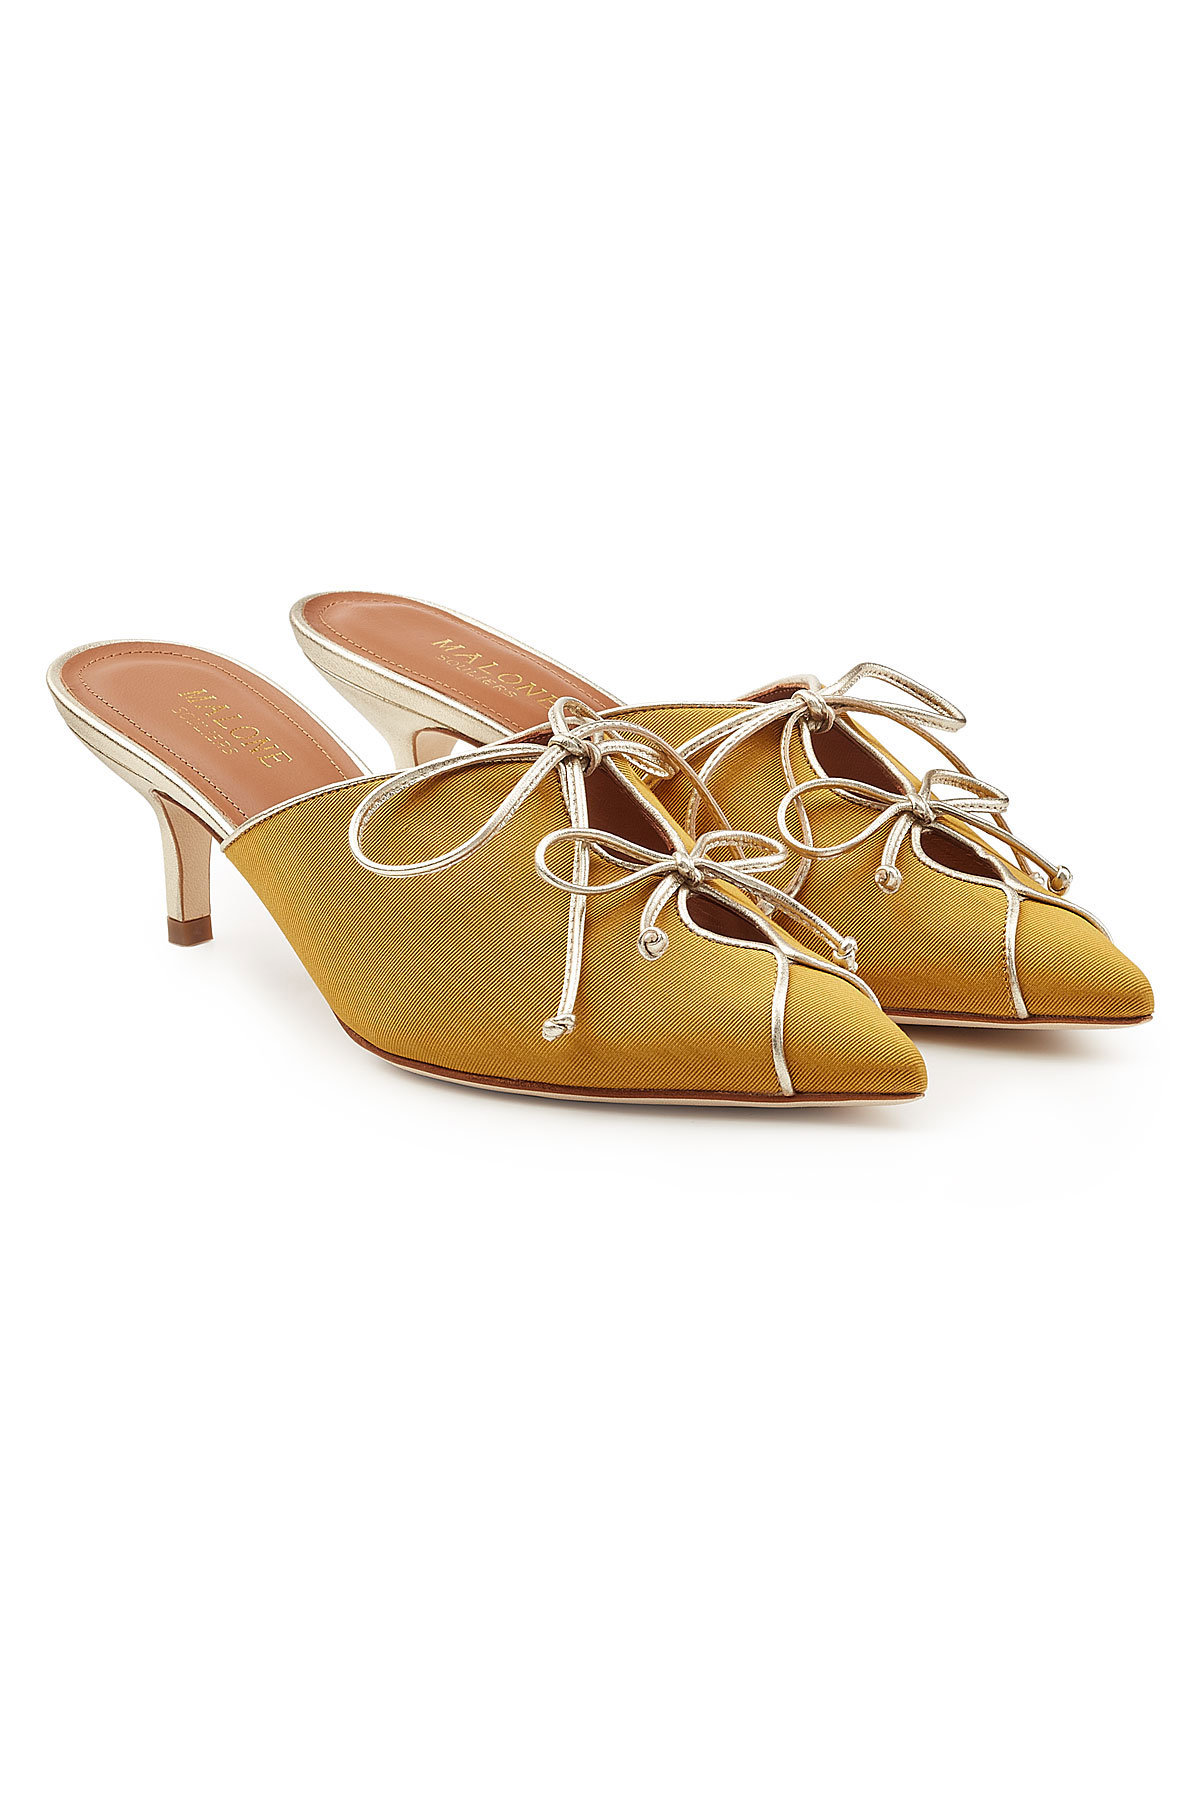 Malone Souliers - Victoria Mules with Leather